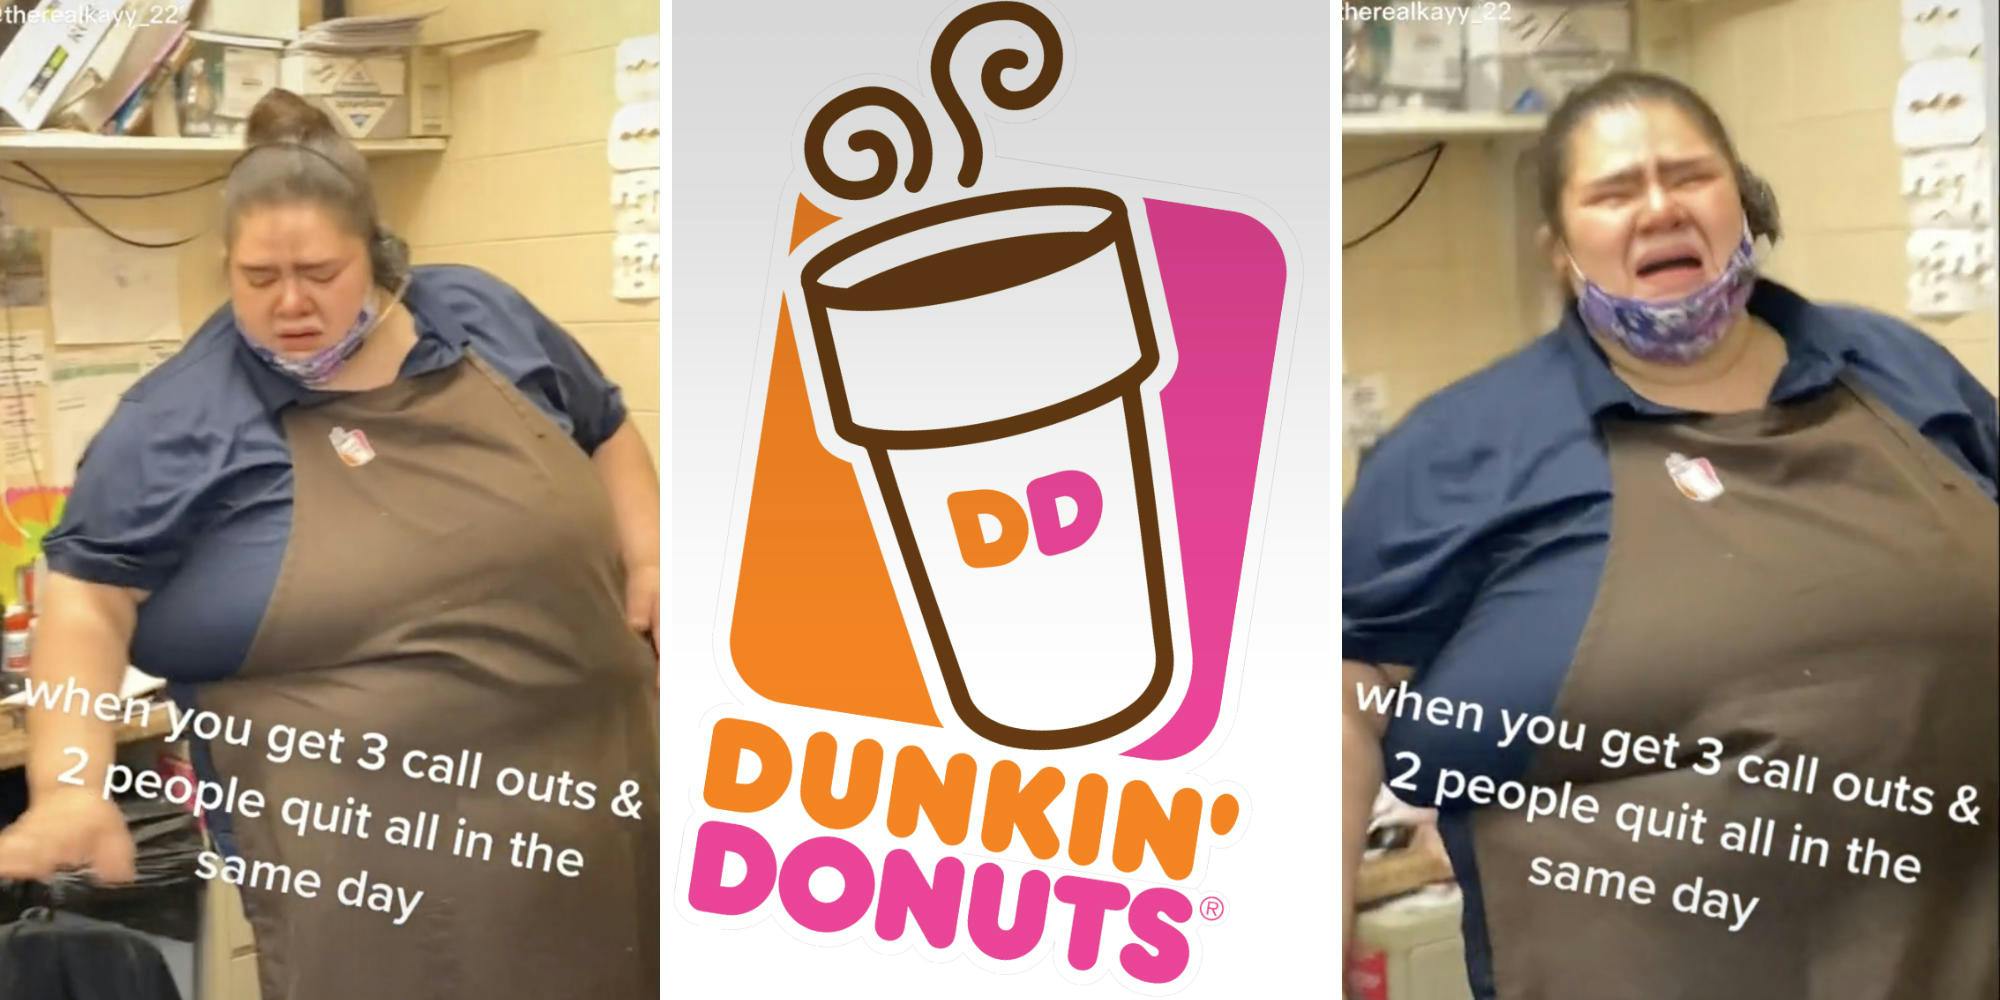 sad woman in apron leaning on chair (l) dunkin donuts logo (c) woman sobbing (r)